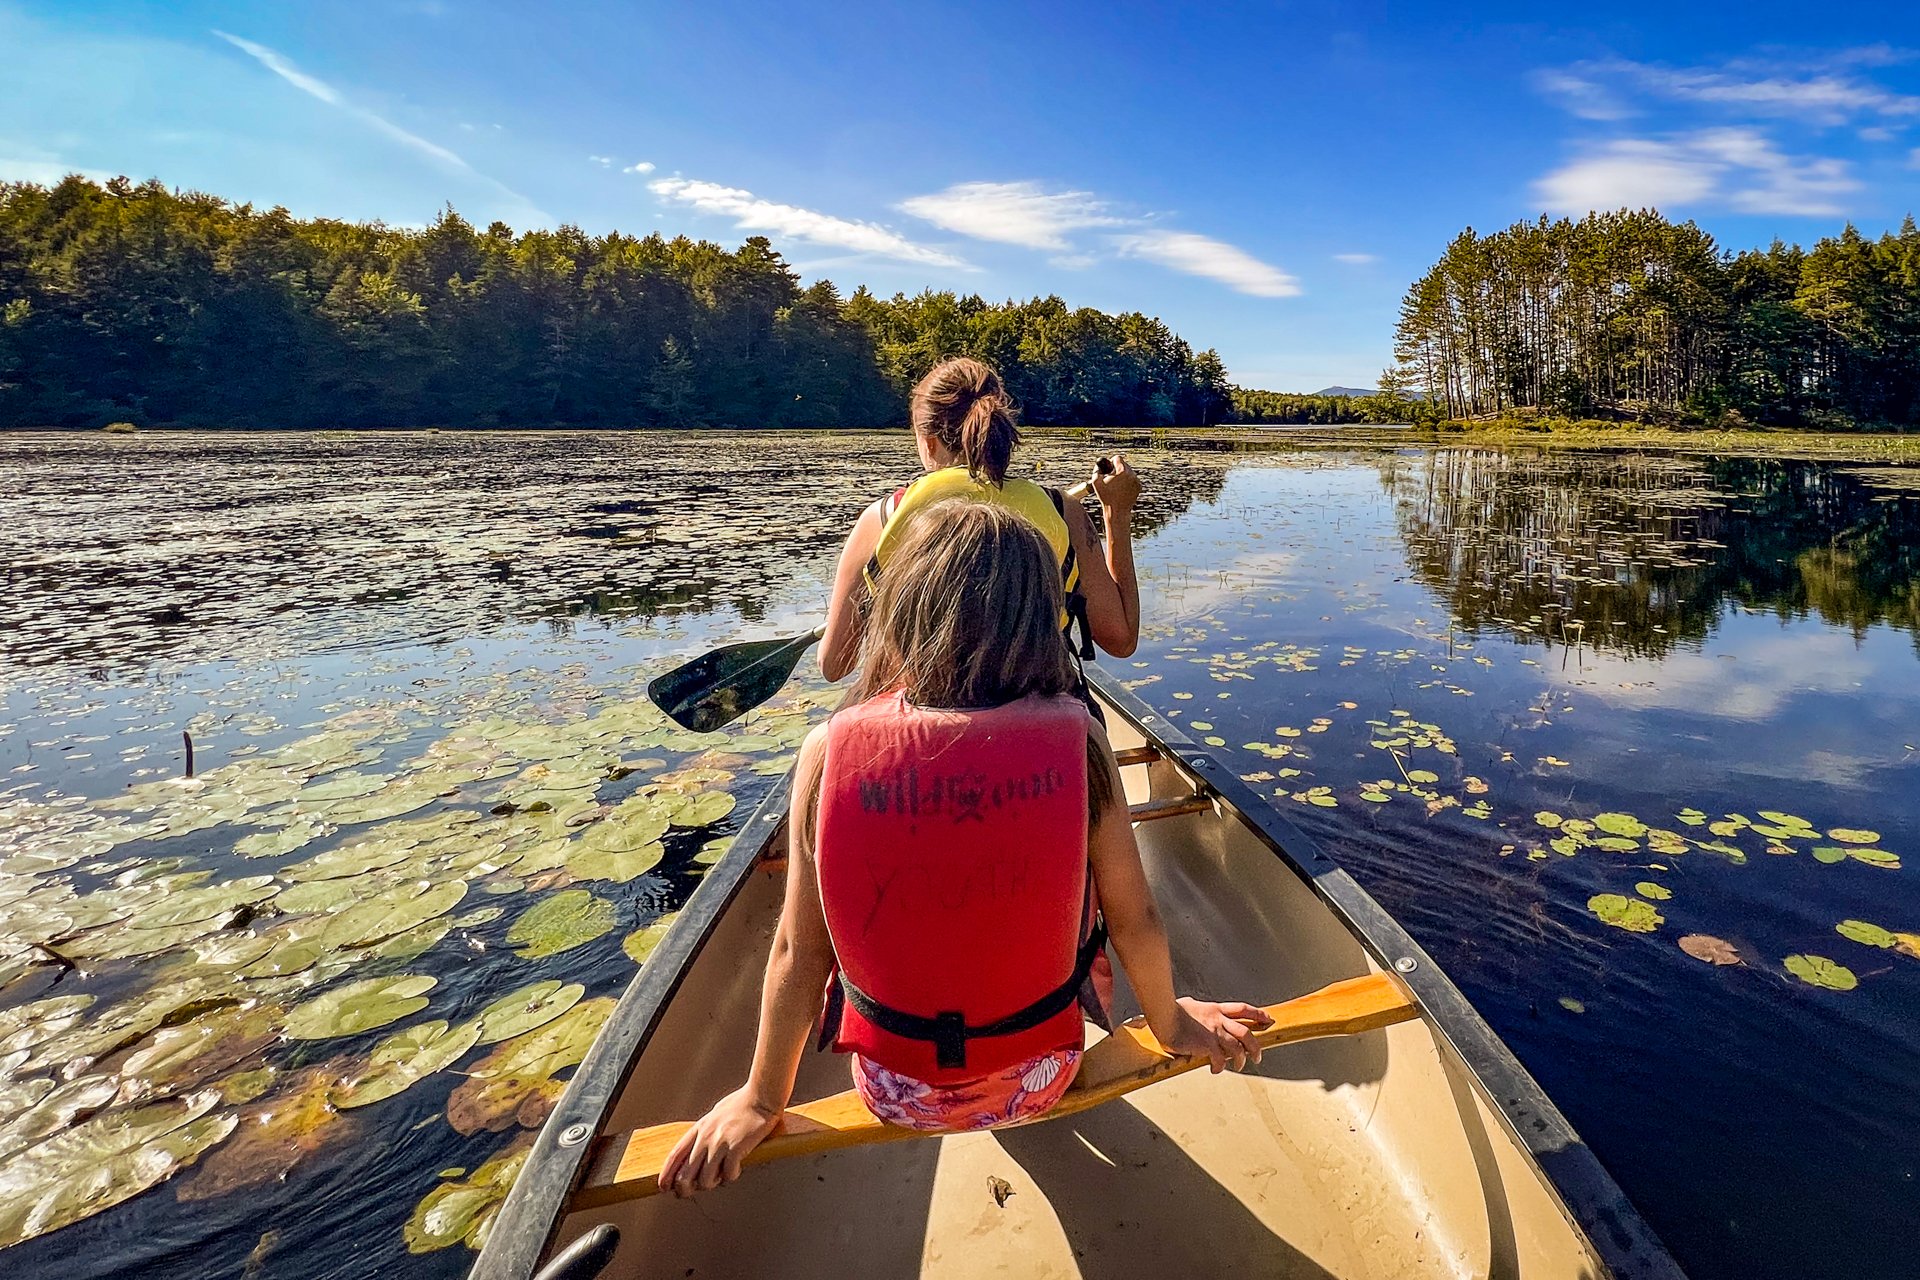 A photo taken from the back of a canoe, with two campers seated in the center and front of the canoe with their backs to the camera, wearing lifejackets that say "Wildwood" on the back. The sky is blue and the boat is surrounded by lily pads and green forest.